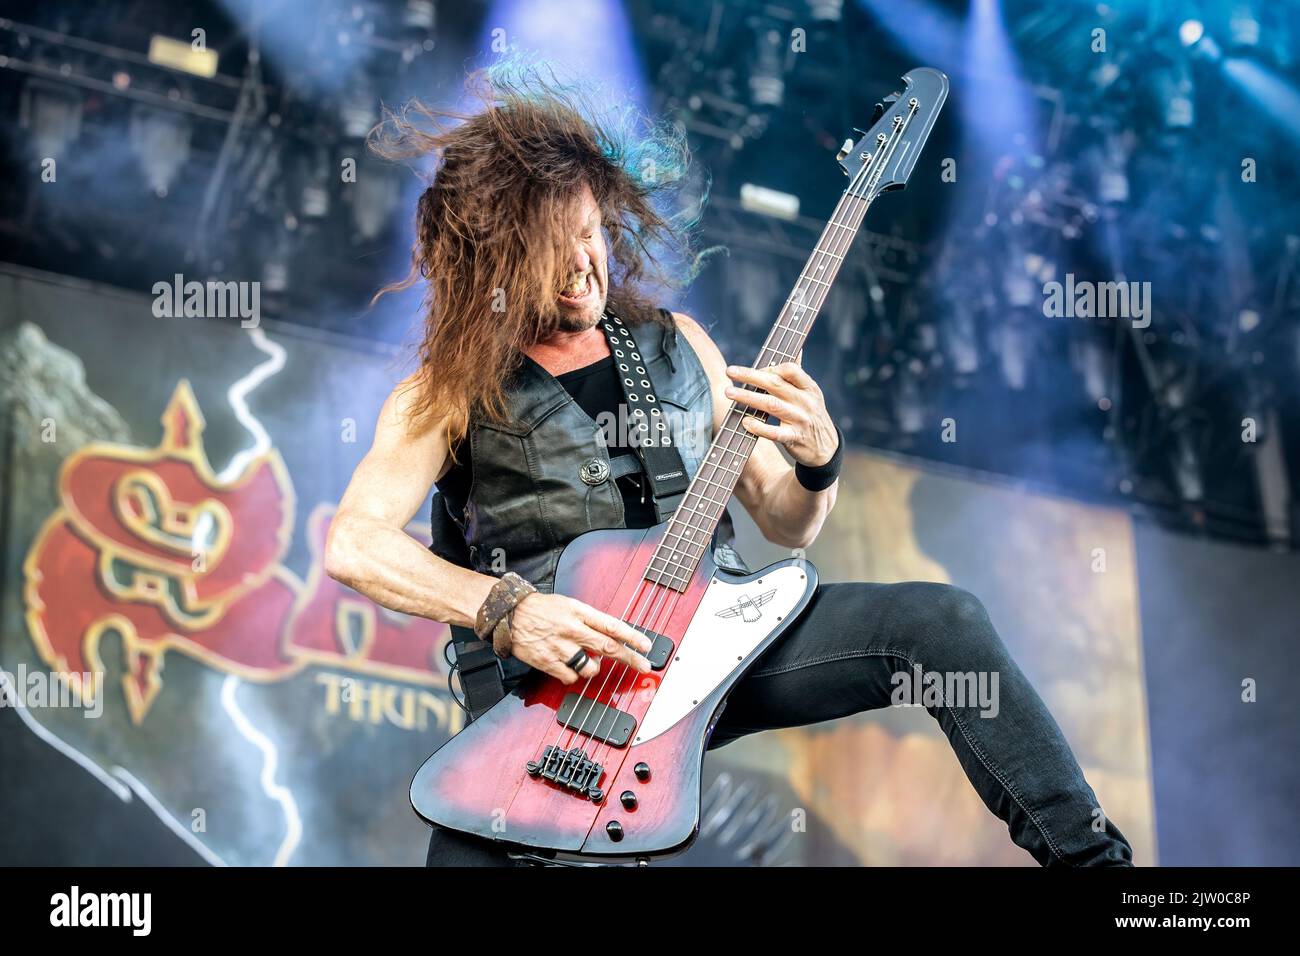 Solvesborg, Sweden. 10th, June 2022. The British heavy metal band Saxon performs a live concert during the Swedish music festival Sweden Rock Festival 2022 in Solvesborg. Here bass player Nibbs Carter is seen live on stage. (Photo credit: Gonzales Photo - Terje Dokken). Stock Photo